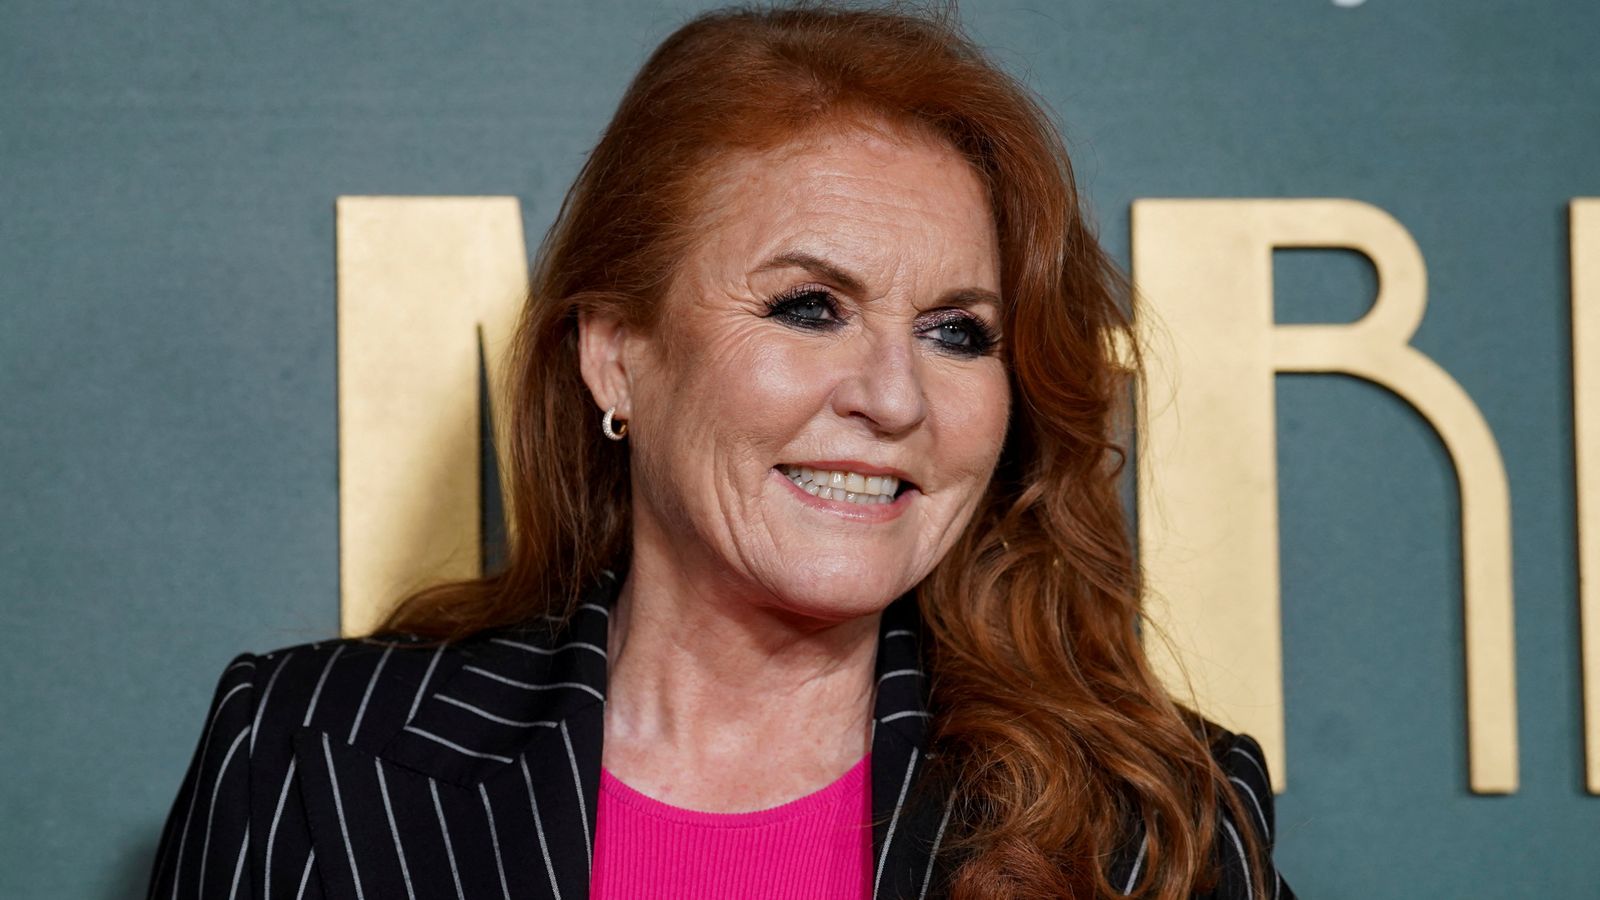 Sarah, Duchess of York diagnosed with skin cancer after breast cancer treatment